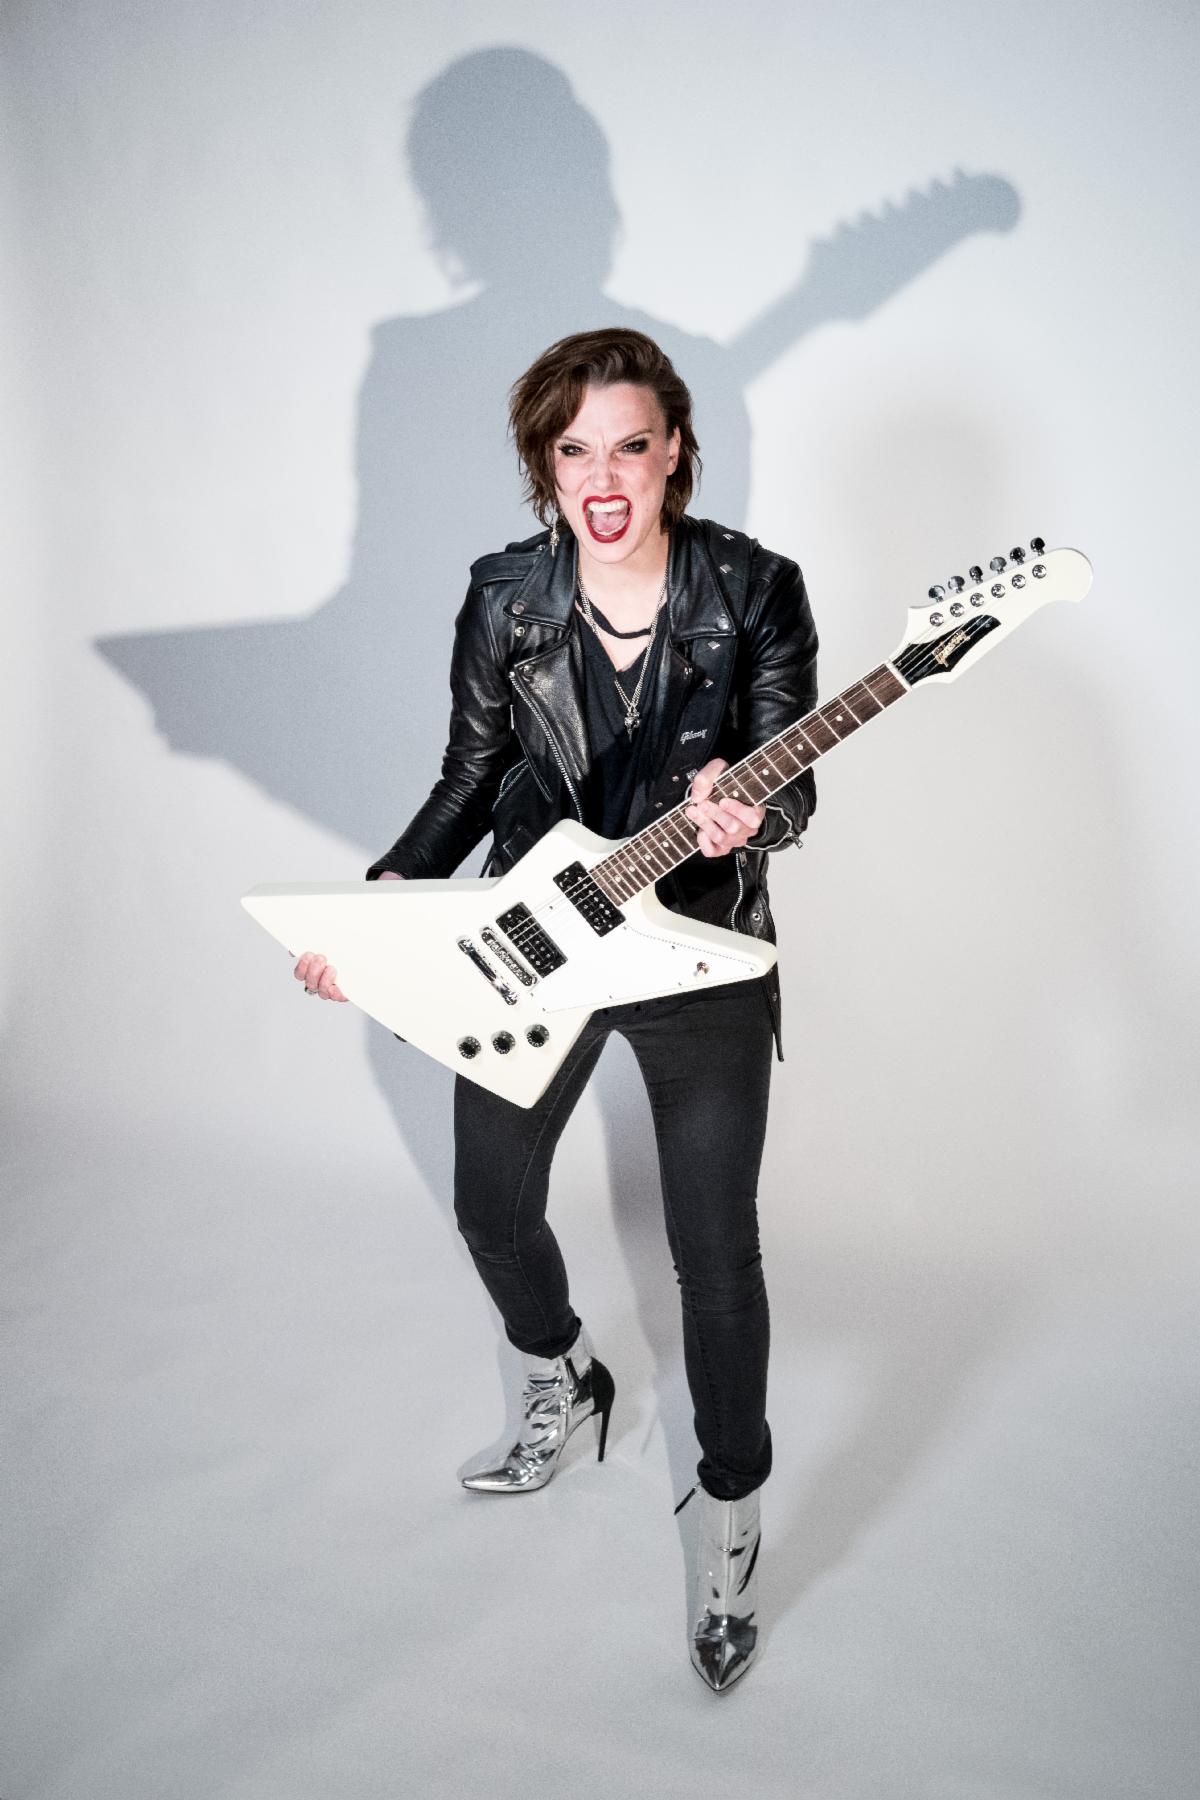 Lzzy Hale Joins Gibson As First Female Brand Ambassador and Gibson Gives Advisory Board Member; GRAMMY Award-Winning Vocalist and Guitarist for Halestorm to Create Guitar Collection